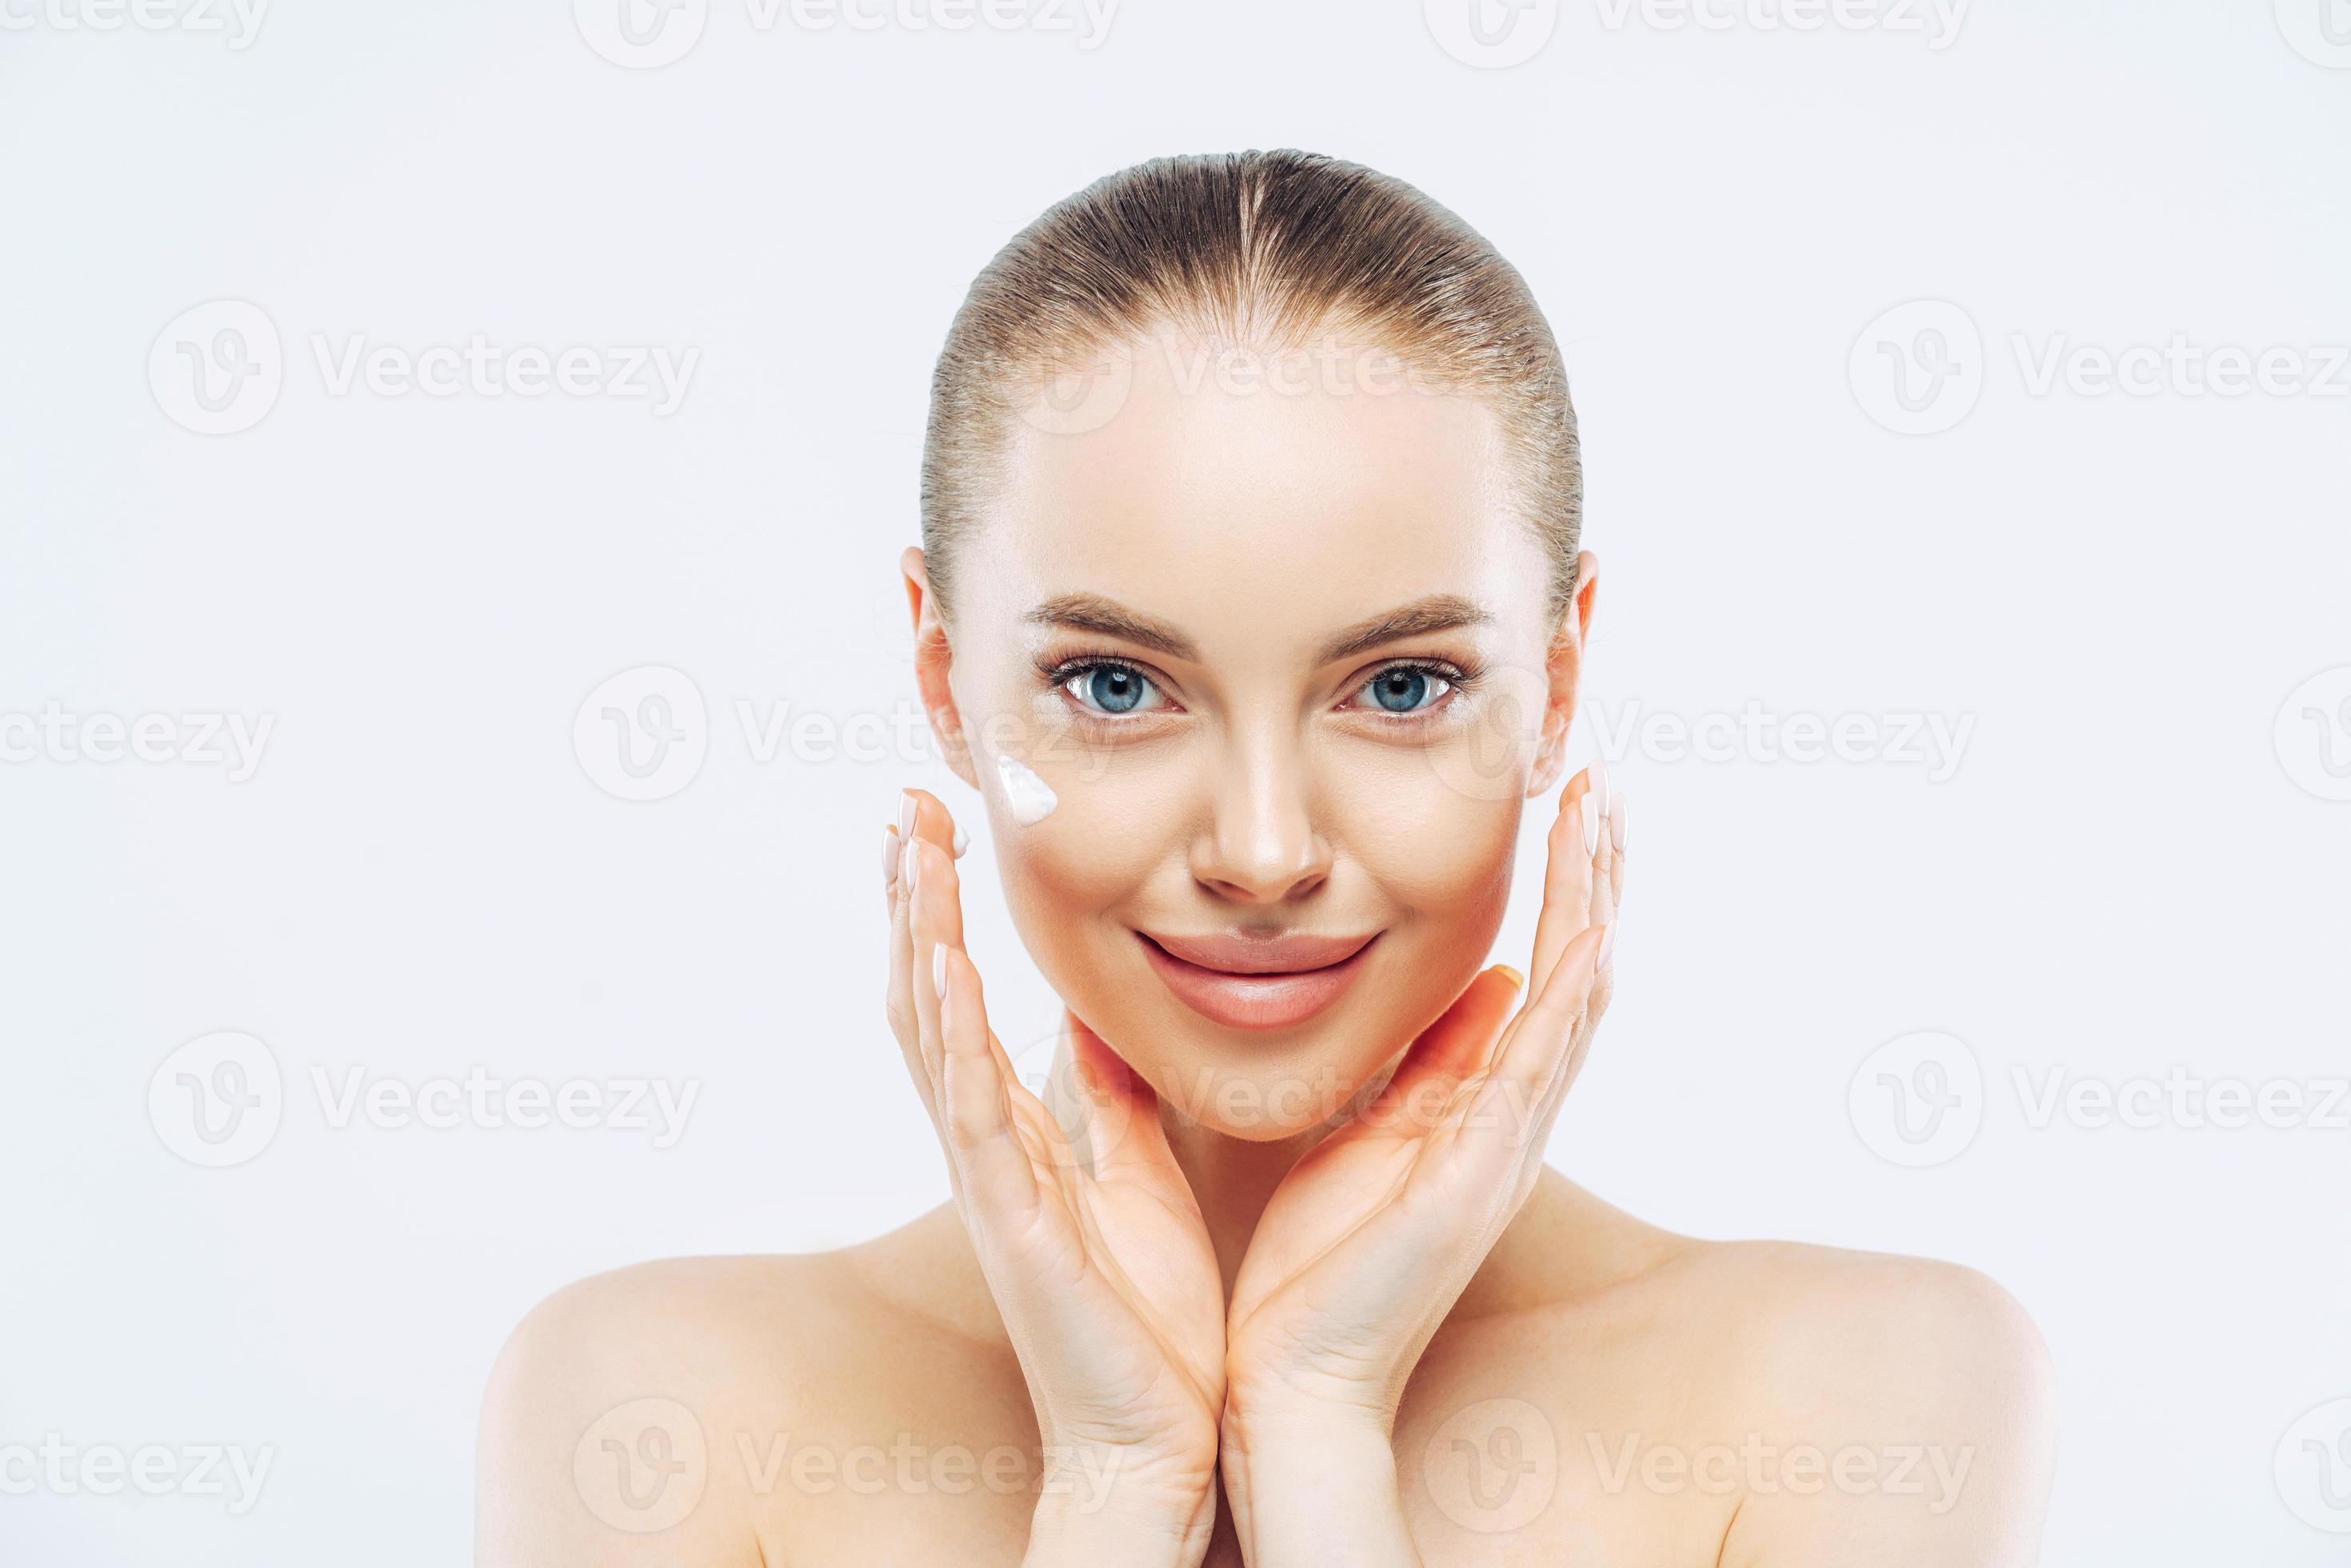 Close up shot of attractive naked young woman with combed hair, applies  face cream or lotion, touches face, has natural makeup, poses against white  background, looks after skin. High resolution 7907908 Stock